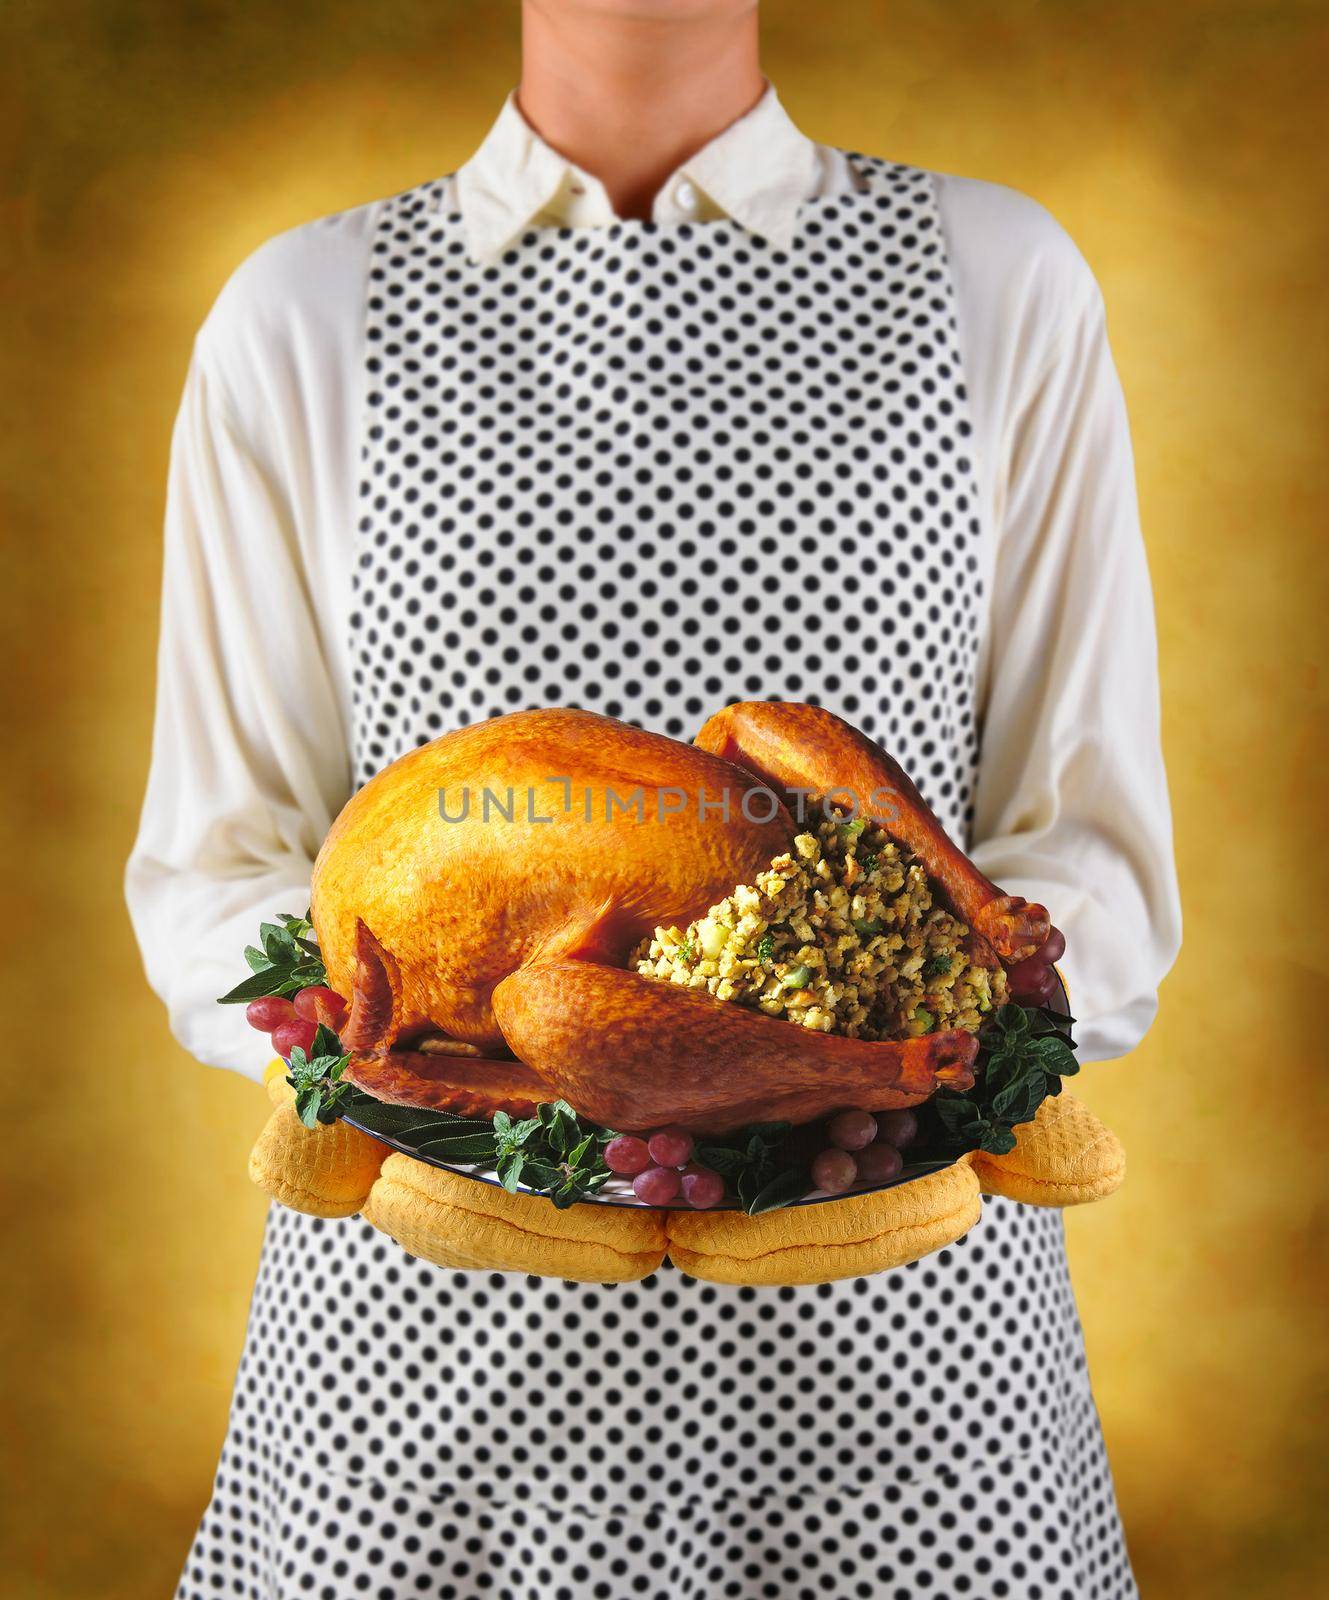 Closeup of a homemaker in an apron and oven mitts holding a platter with a roasted turkey.; Woman is unrecognizable. Shallow depth on a warm mottled background.